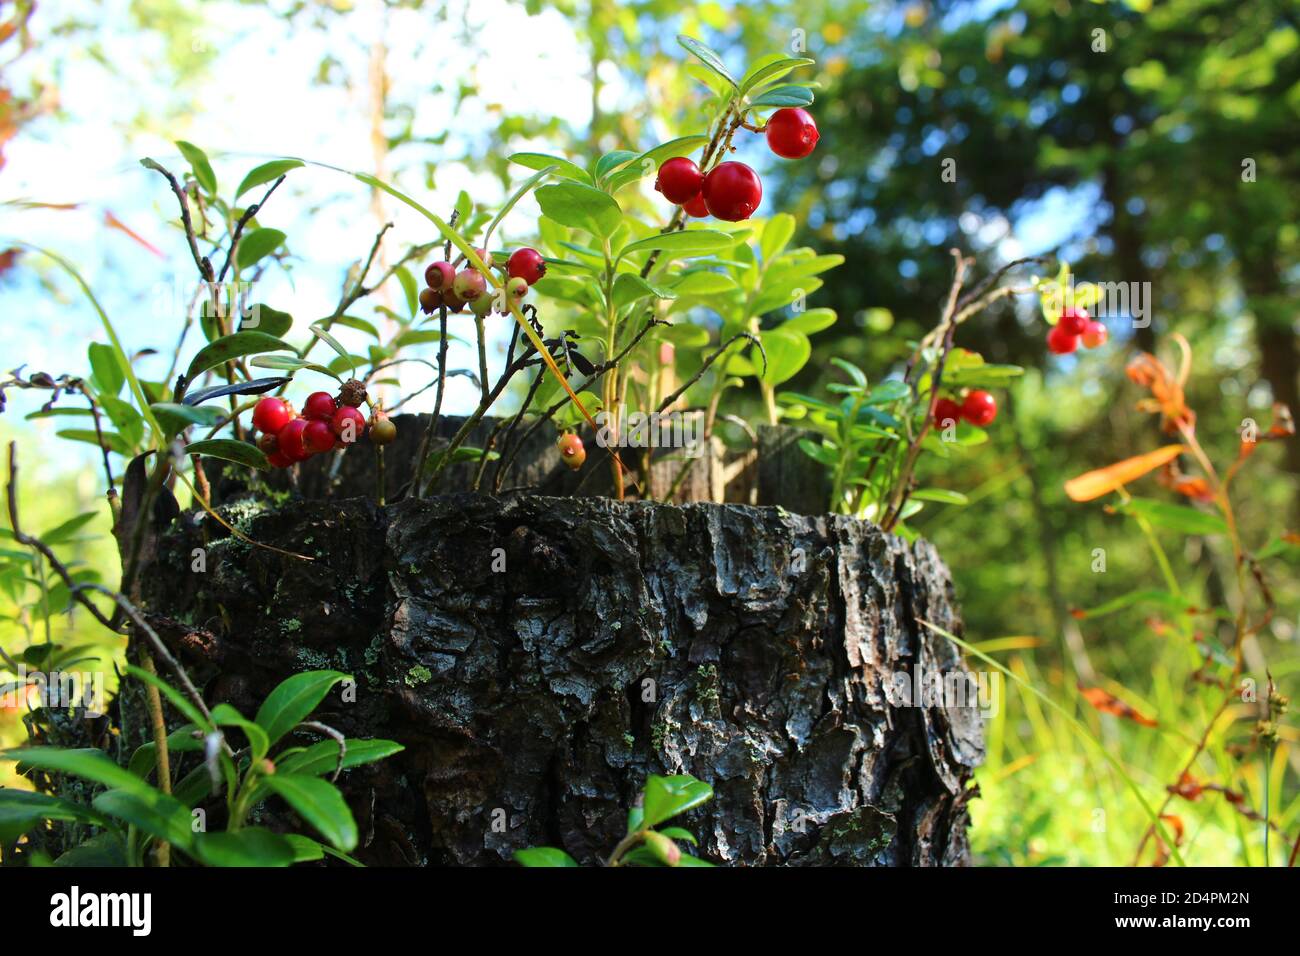 Beautiful lingonberry looking out of an old tree stump in the woods Stock Photo